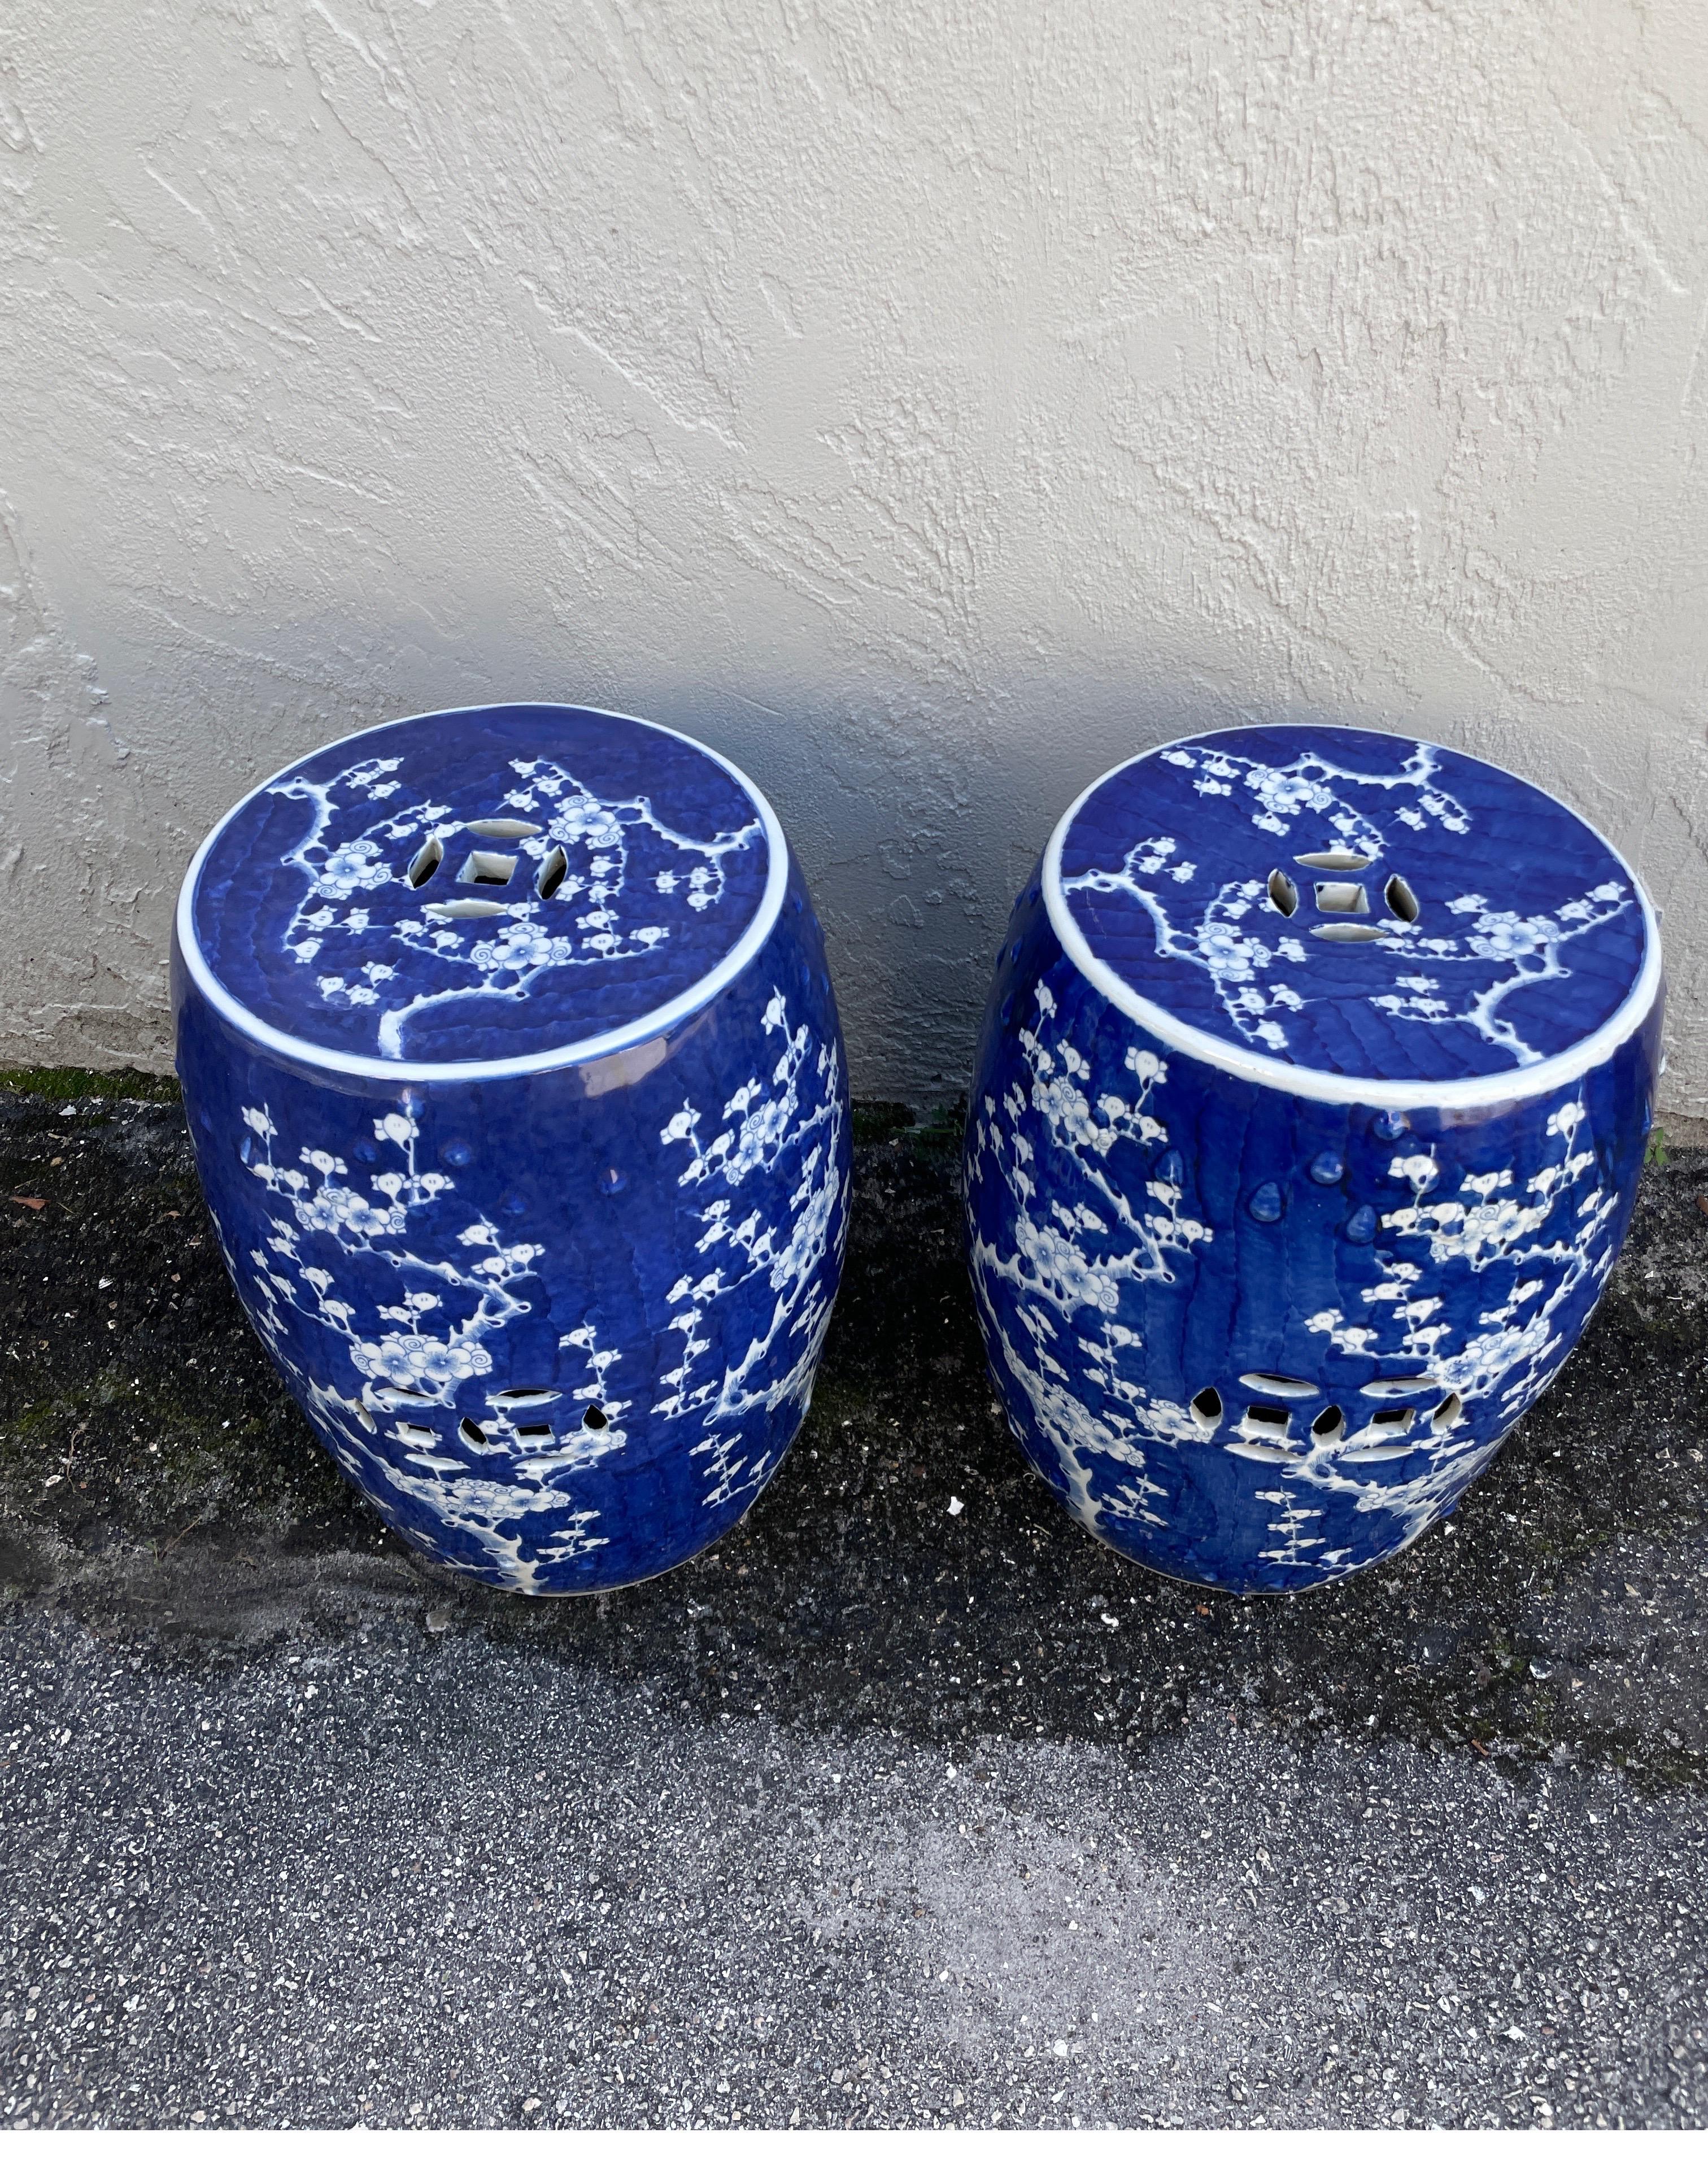 Striking pair of dark blue & white garden seats. The overall white branch & lotus flower design on the rich dark blue background makes these a standout wherever you place them.